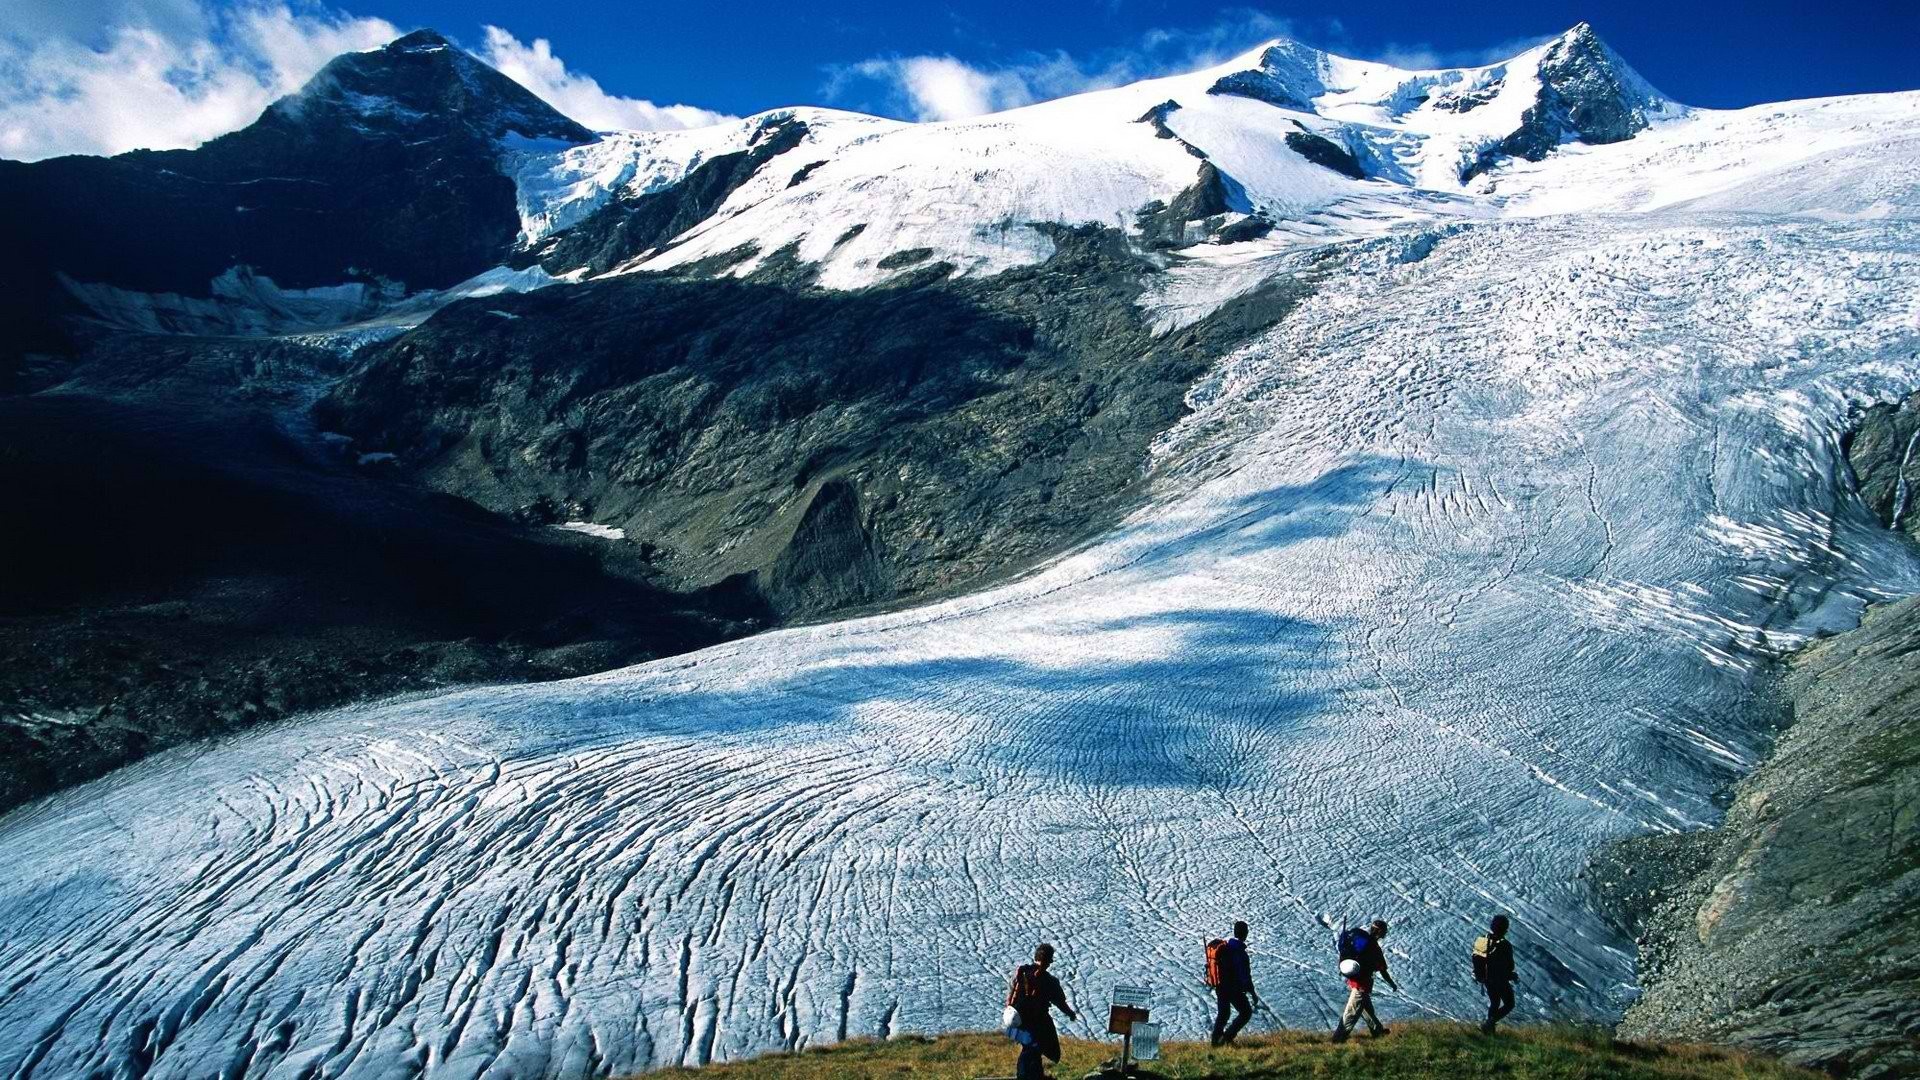 Glacier mountains, Hiking people, Outdoor sports, National park, 1920x1080 Full HD Desktop